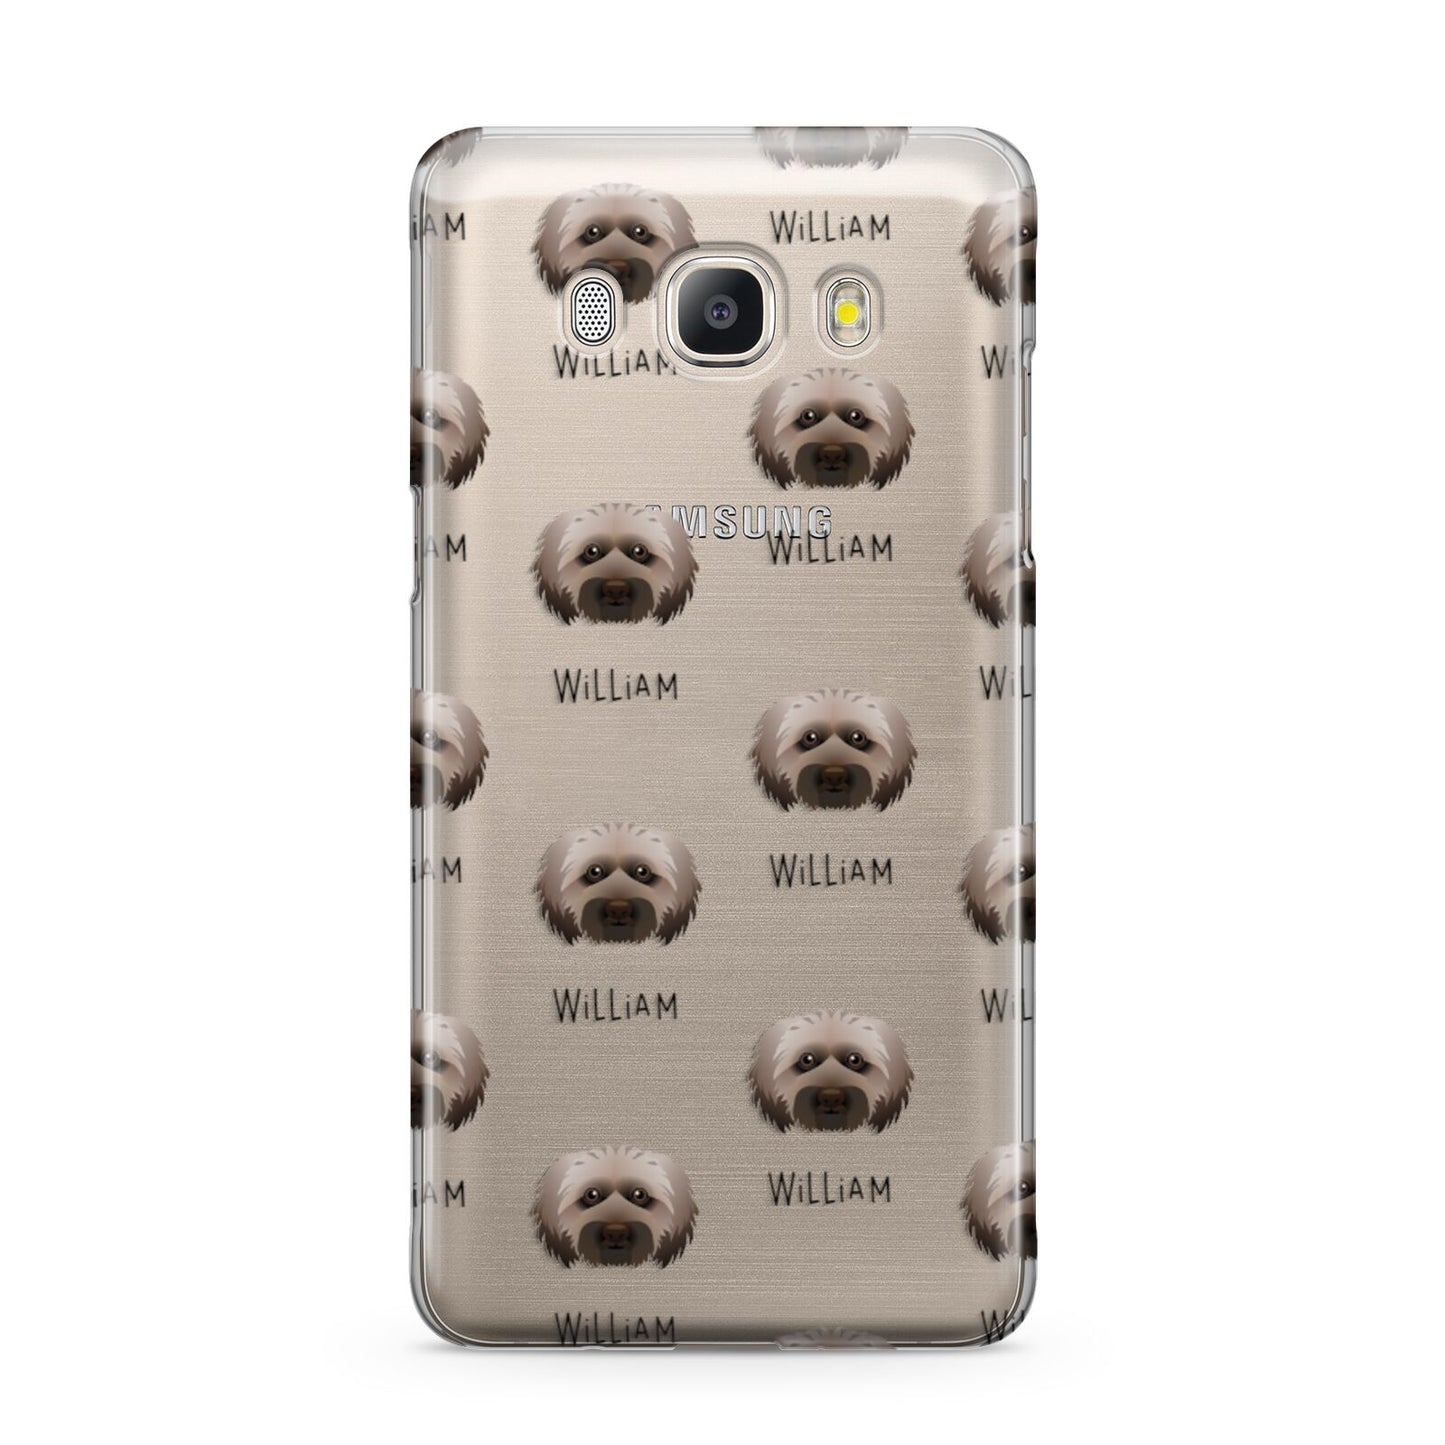 Doxiepoo Icon with Name Samsung Galaxy J5 2016 Case